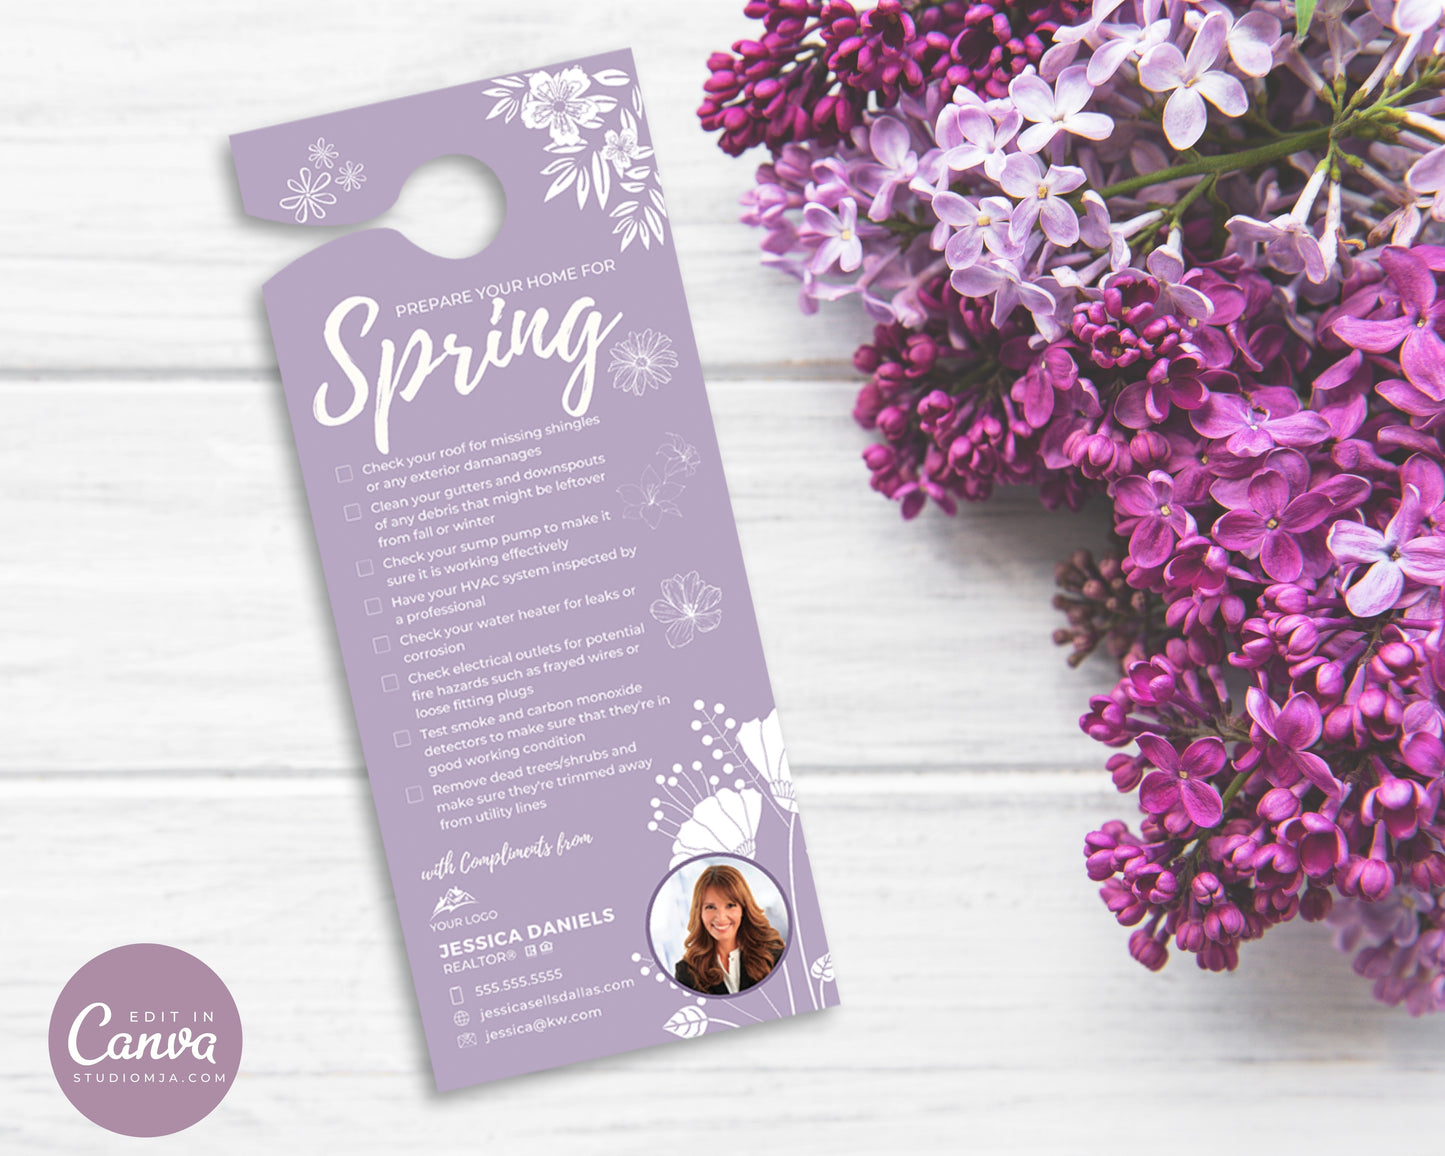 realtor door hanger in a lilac shade with home maintenance, laying on a wood background with purple flowers.